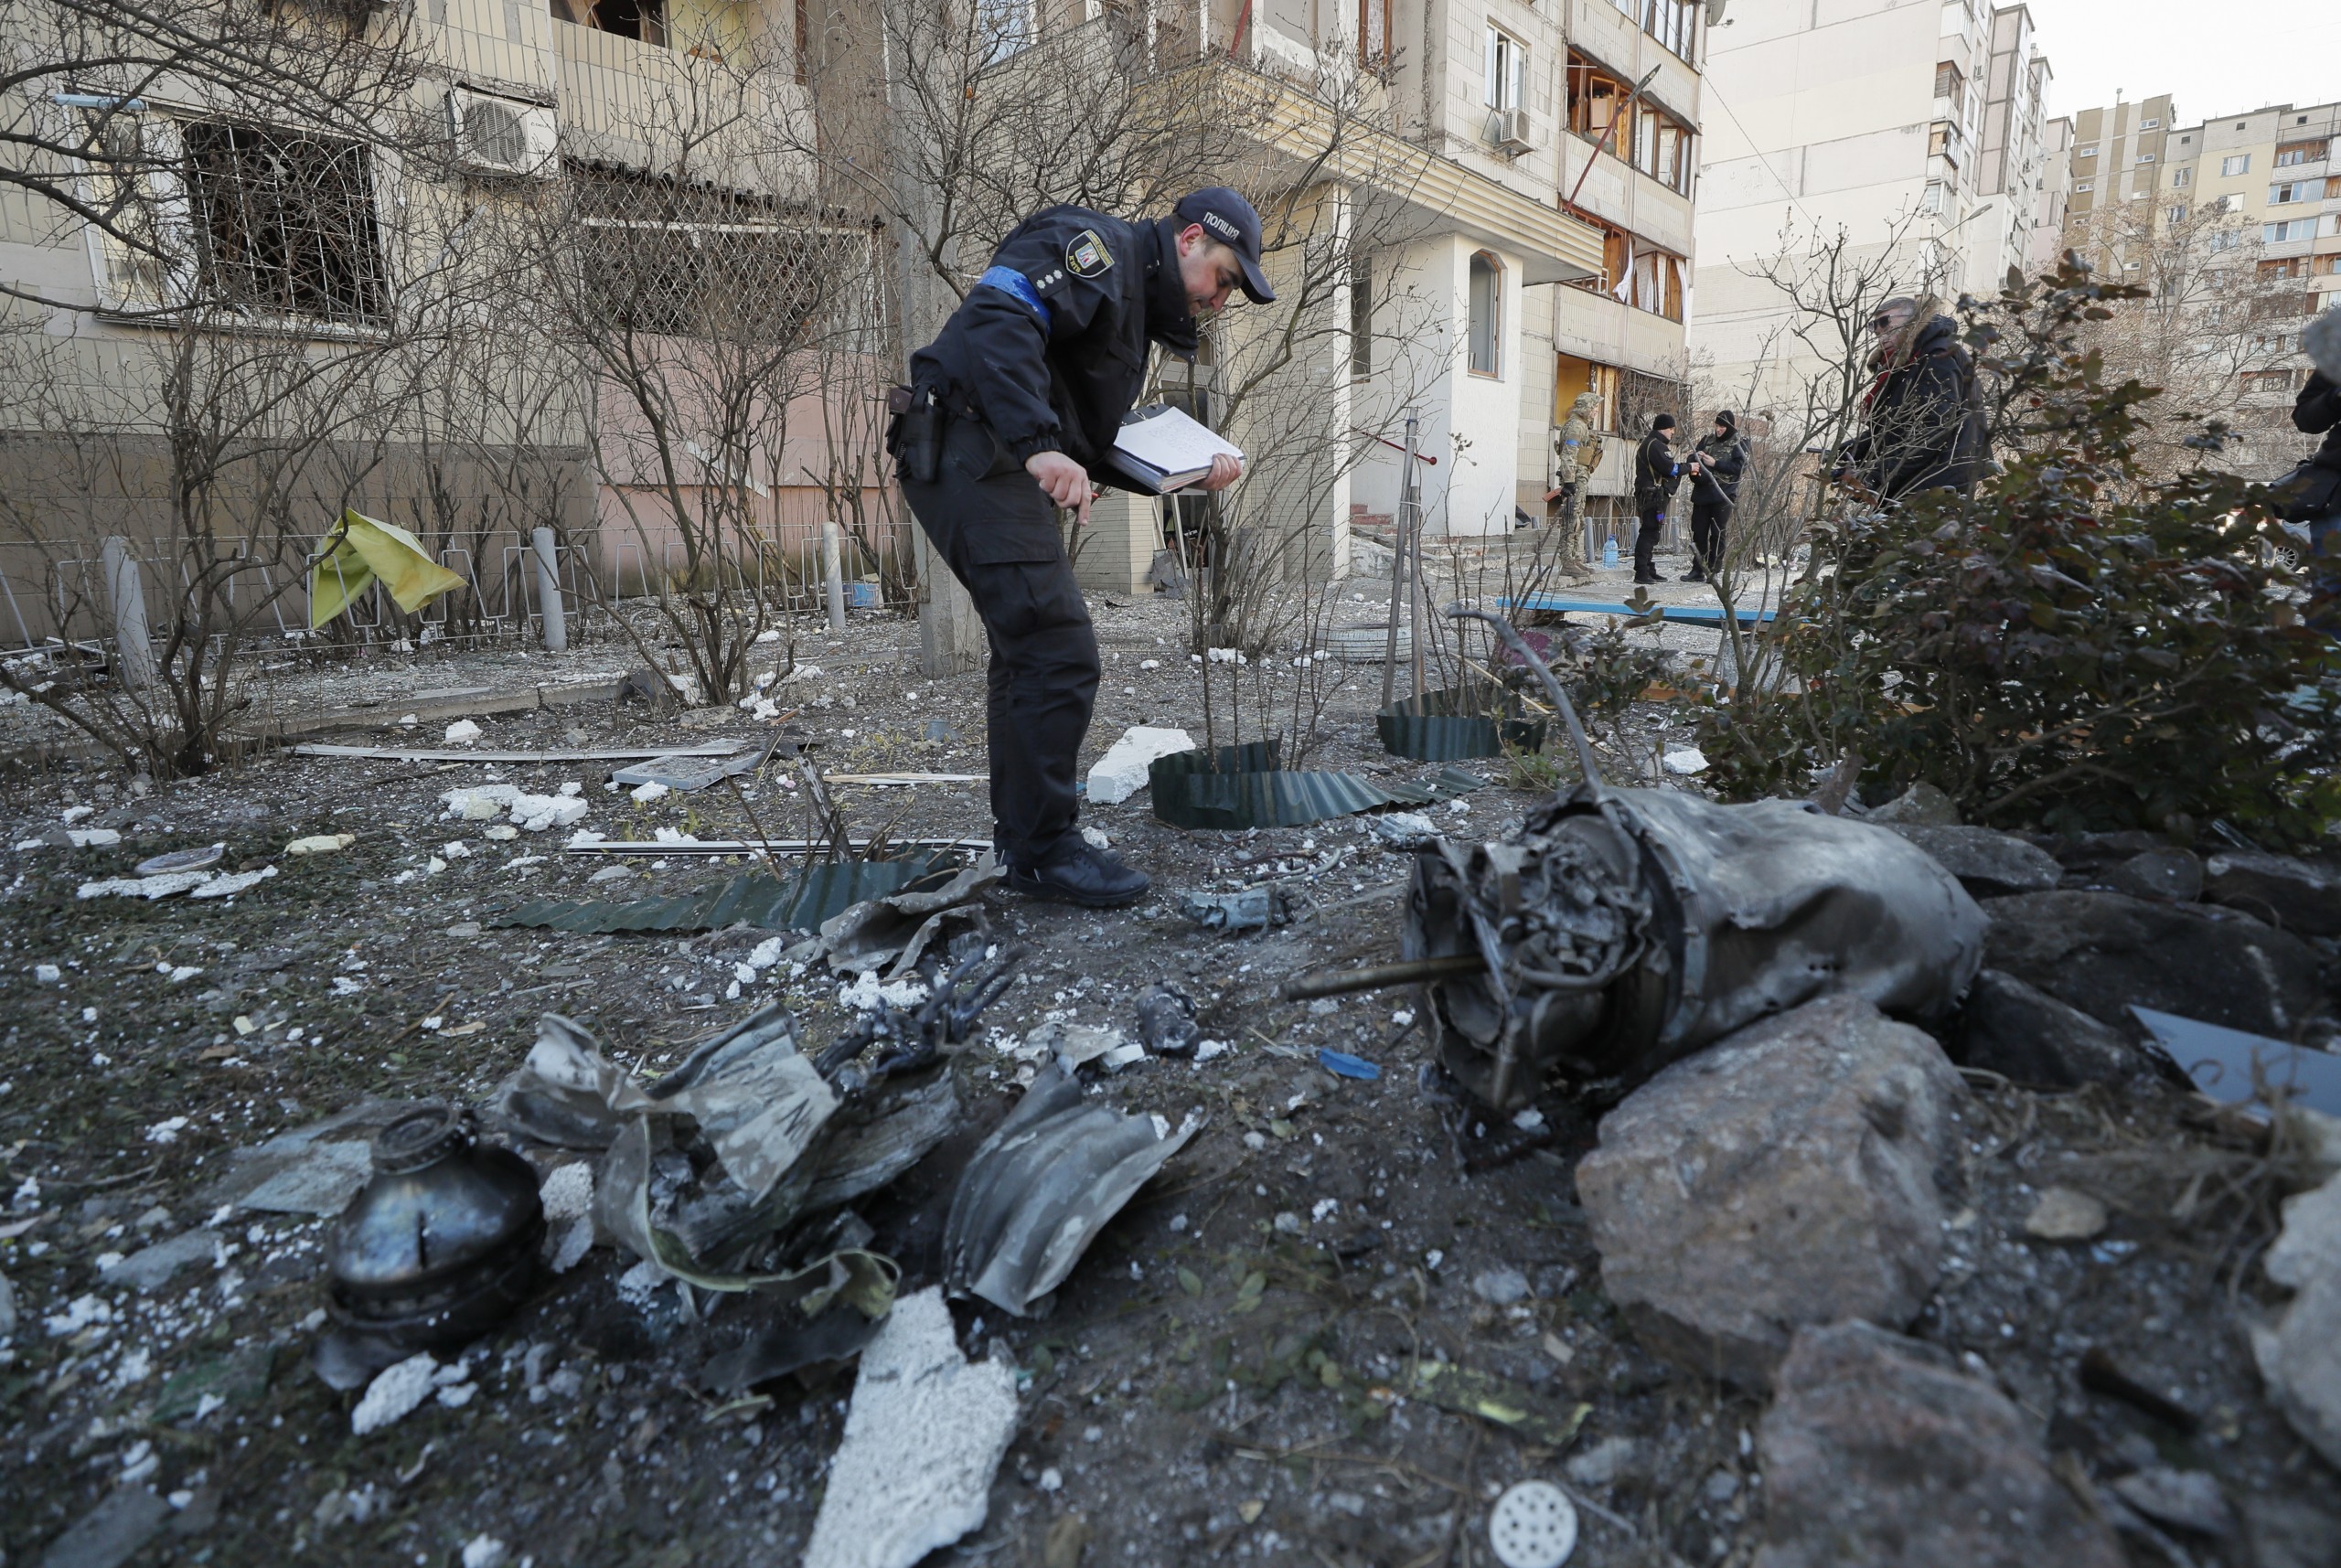 epa09830760 An expert investigates debris of a rocket on the place of shelling of residential building in Kyiv, Ukraine, 17 March 2022. One person was killed and three injured during the shelling. Russian troops entered Ukraine on 24 February prompting the country's president to declare martial law and triggering a series of announcements by Western countries to impose severe economic sanctions on Russia.  EPA/SERGEY DOLZHENKO